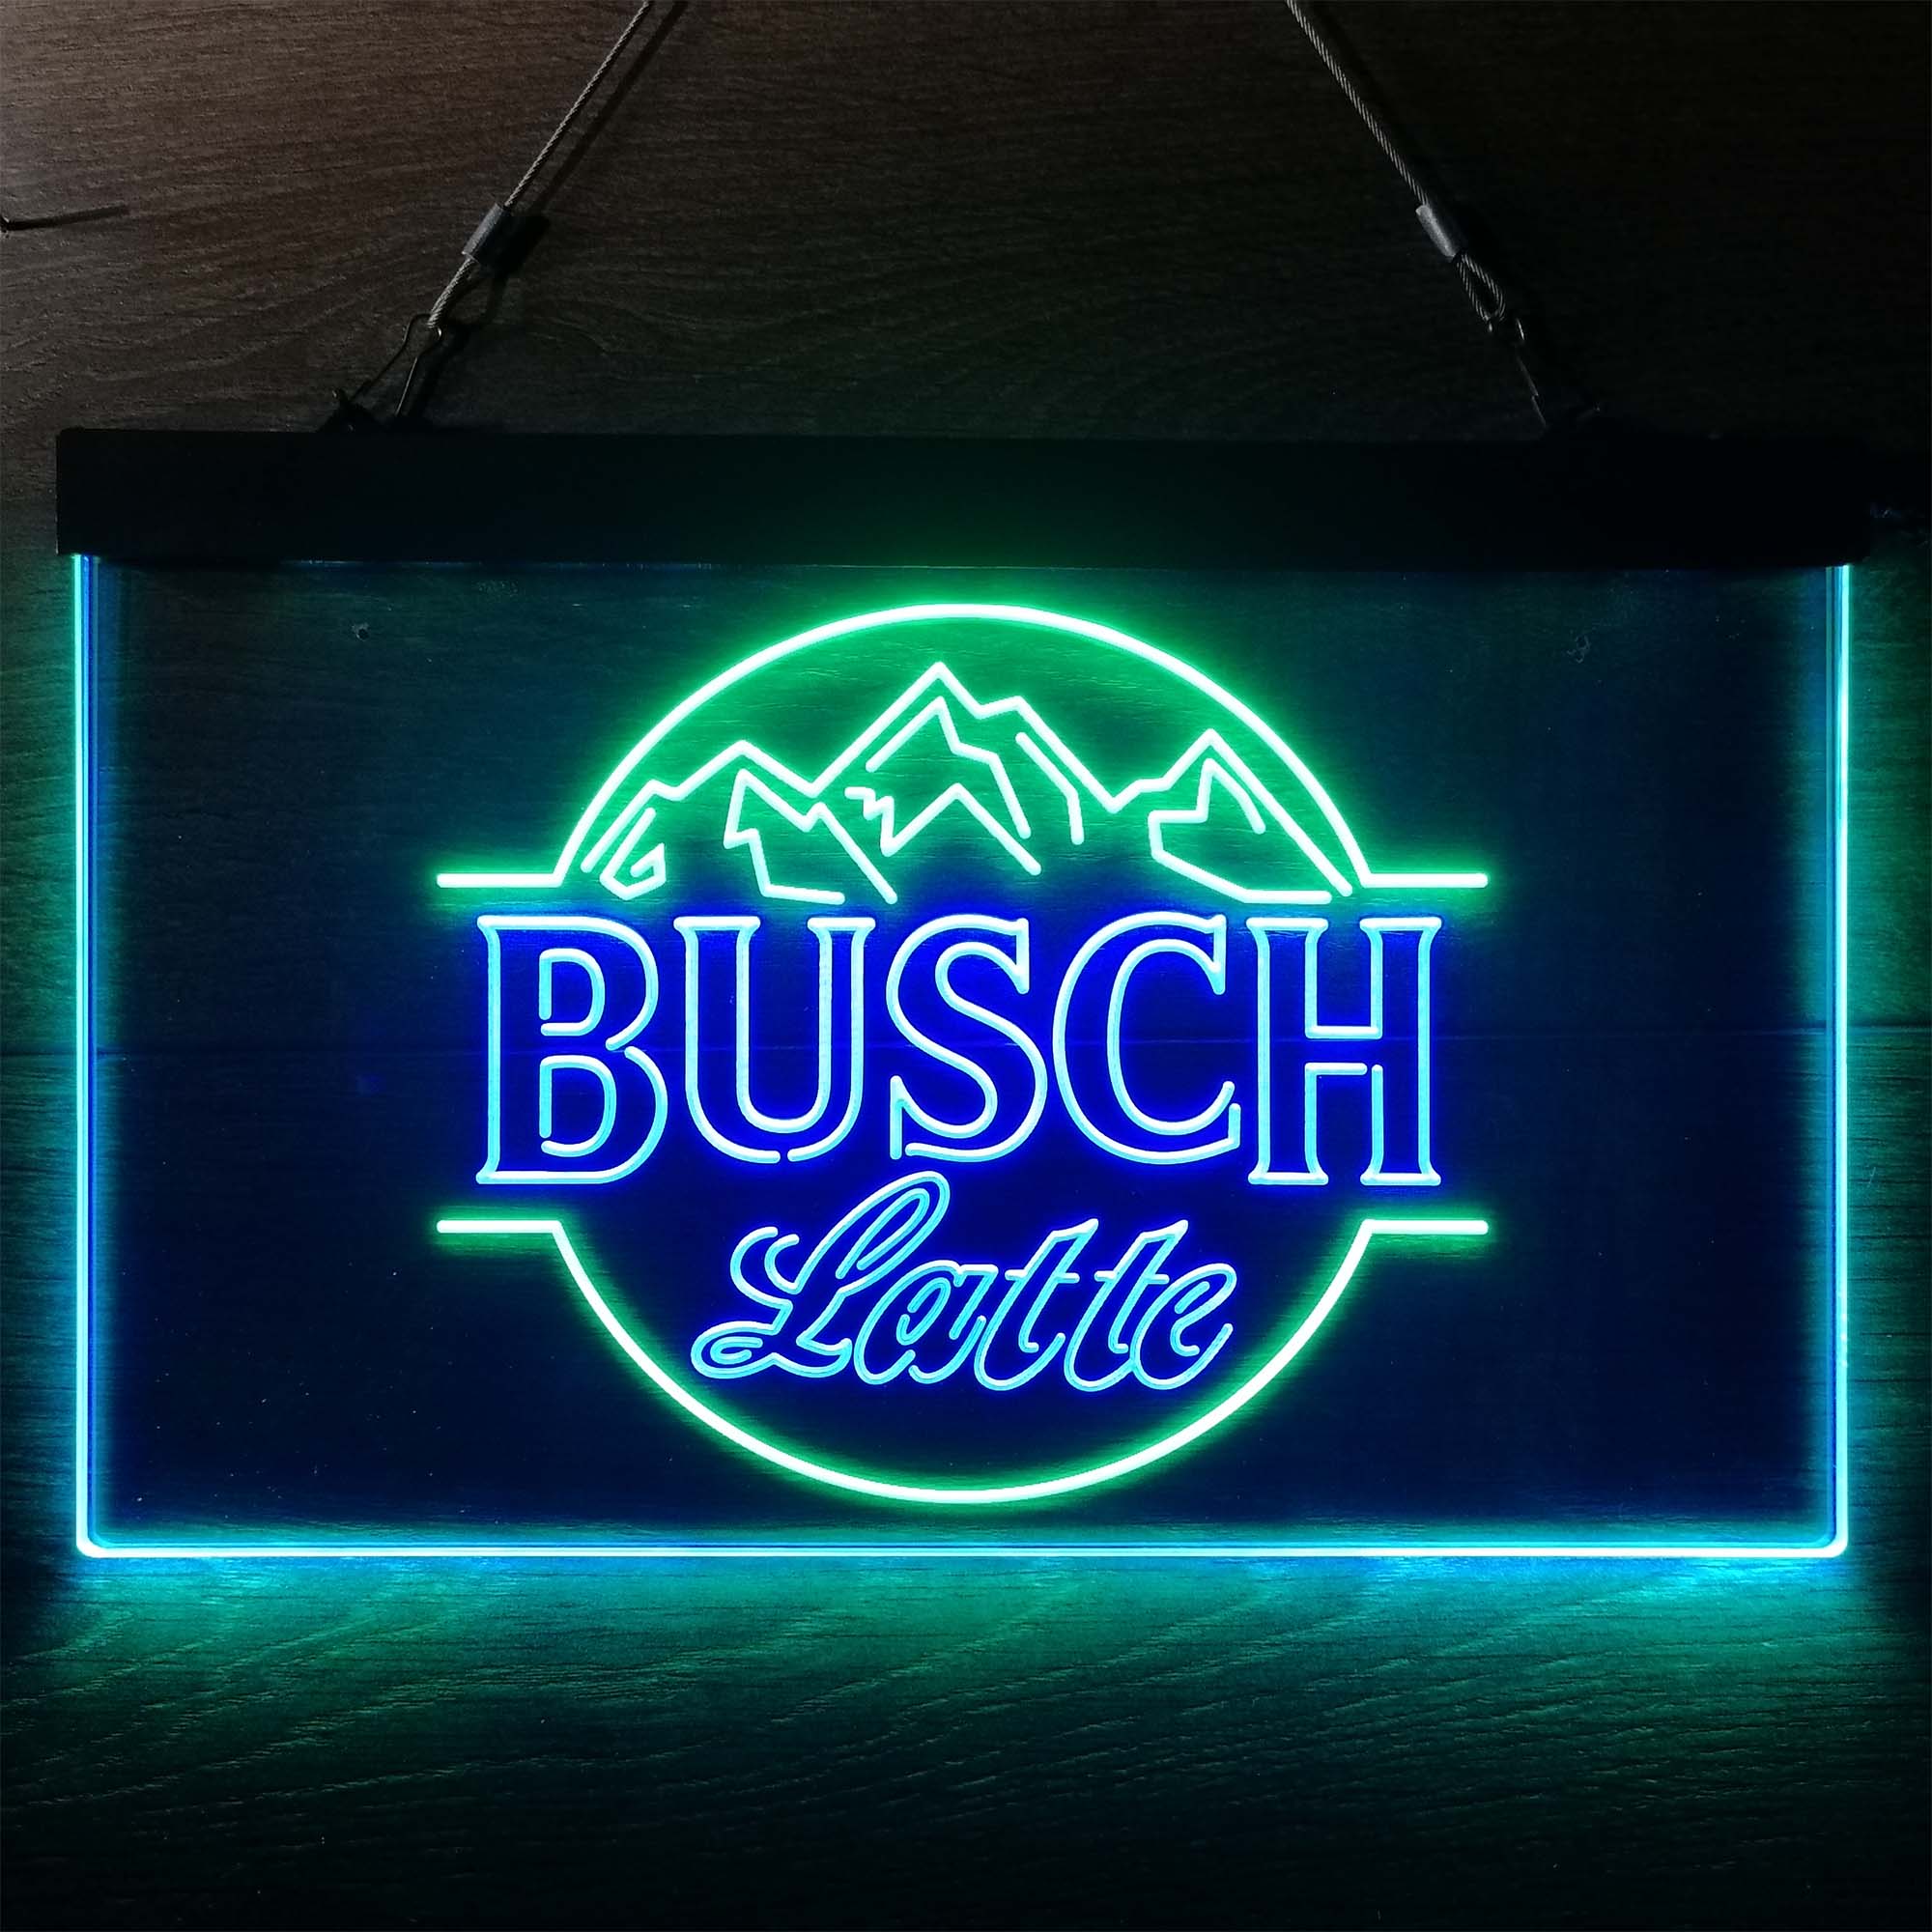 Busch Latte Mountain Neon-Like LED Sign, Beer Bar Decoration, Wall Art Plaque